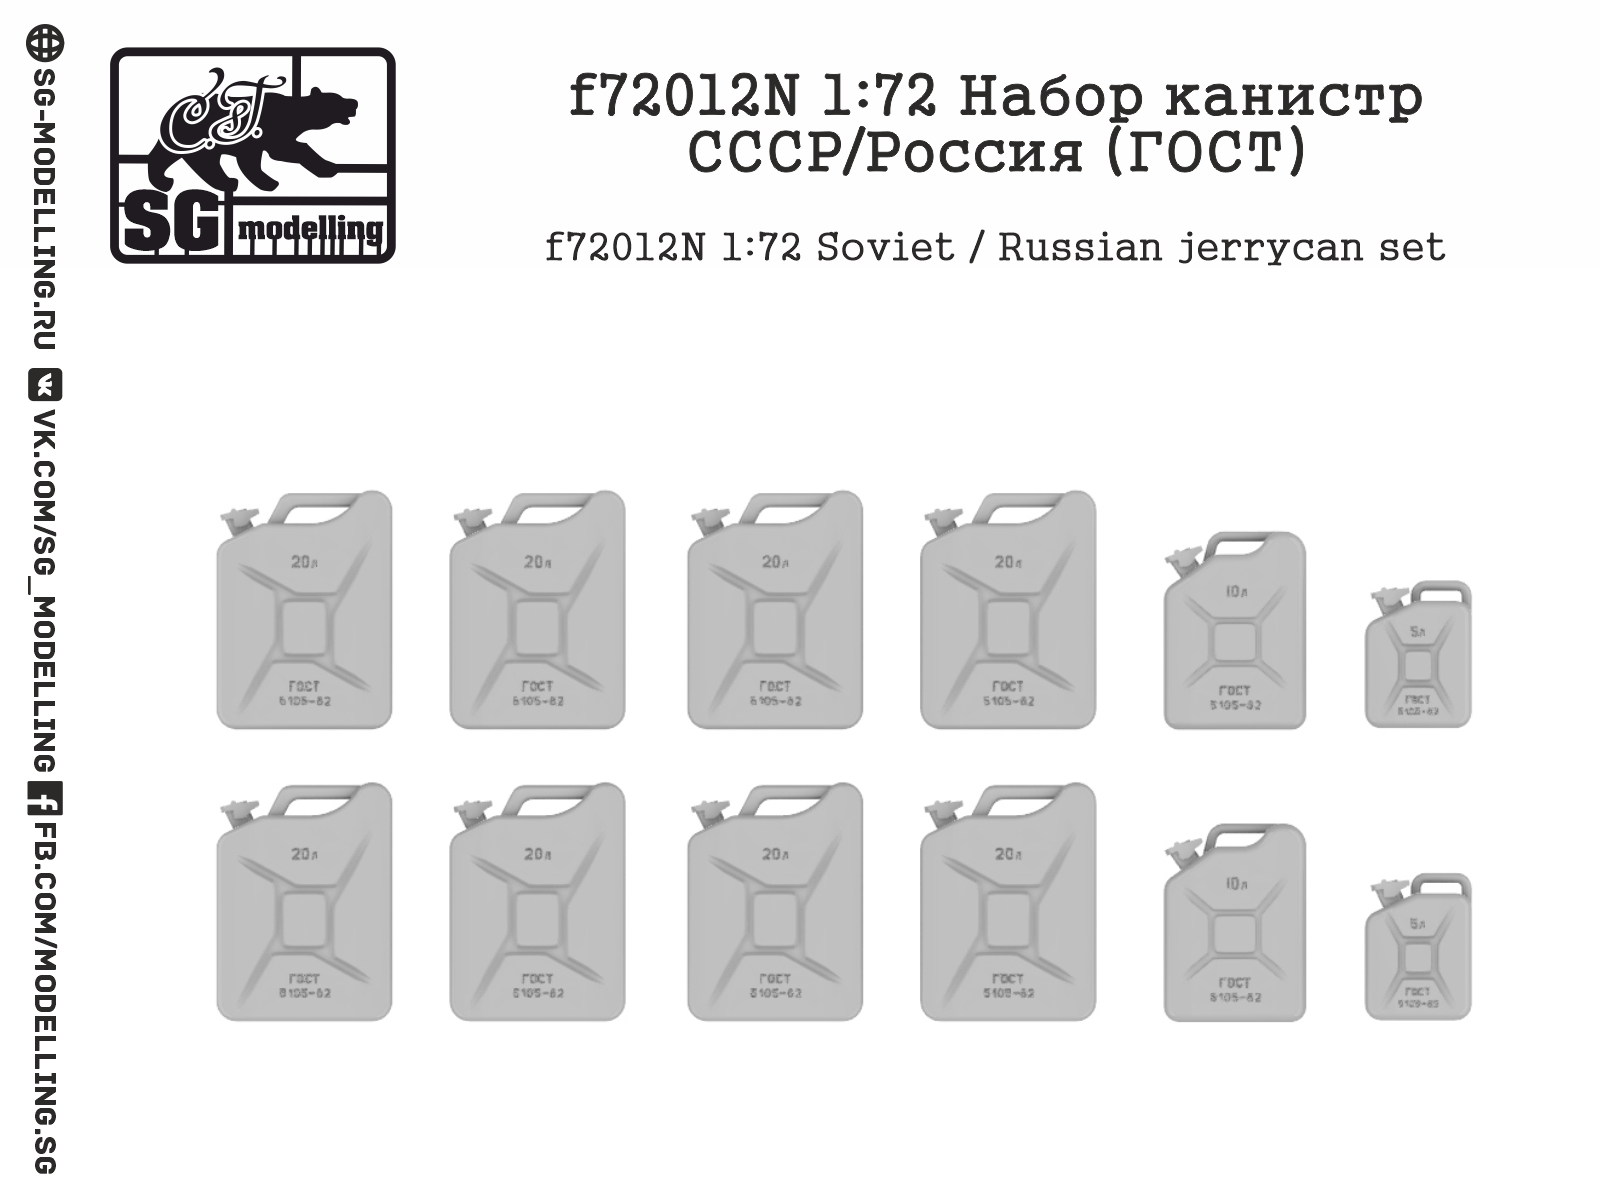 Soviet / Russian jerrycans GOST